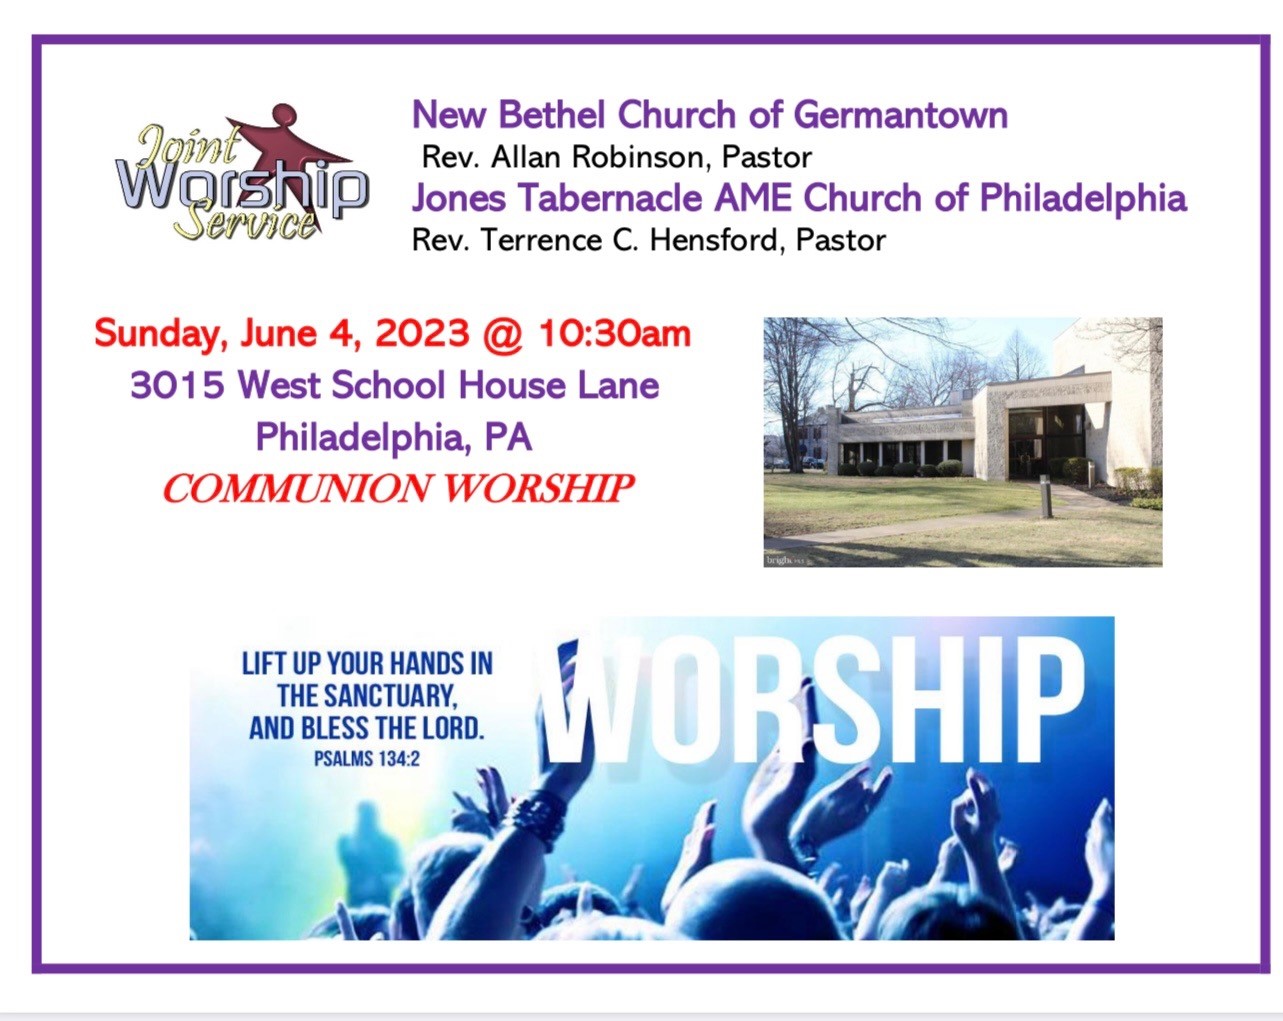 Joint Worship service